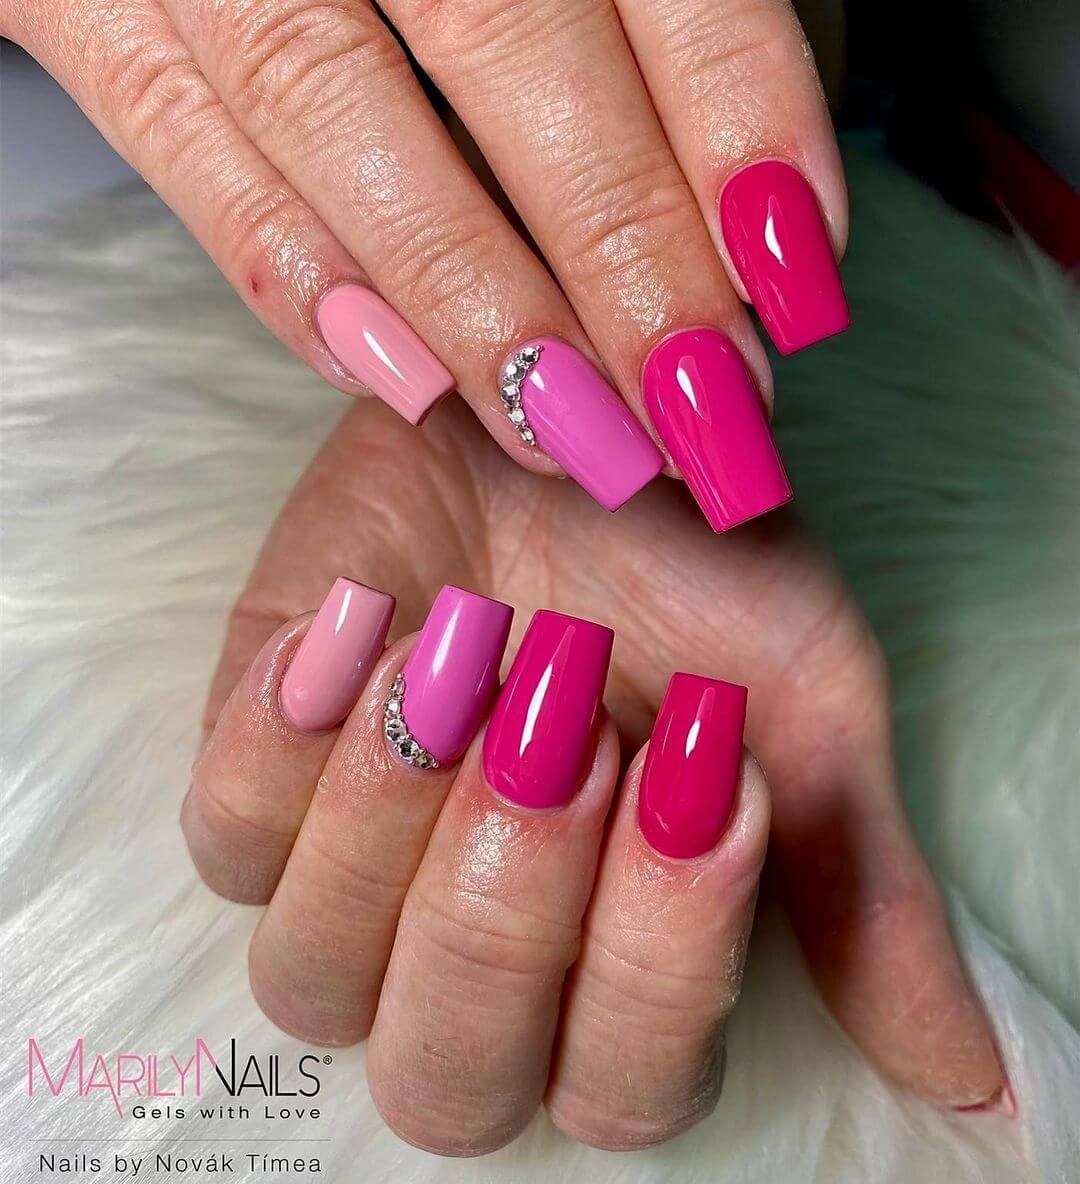 Different shades of pink with 3D nail art